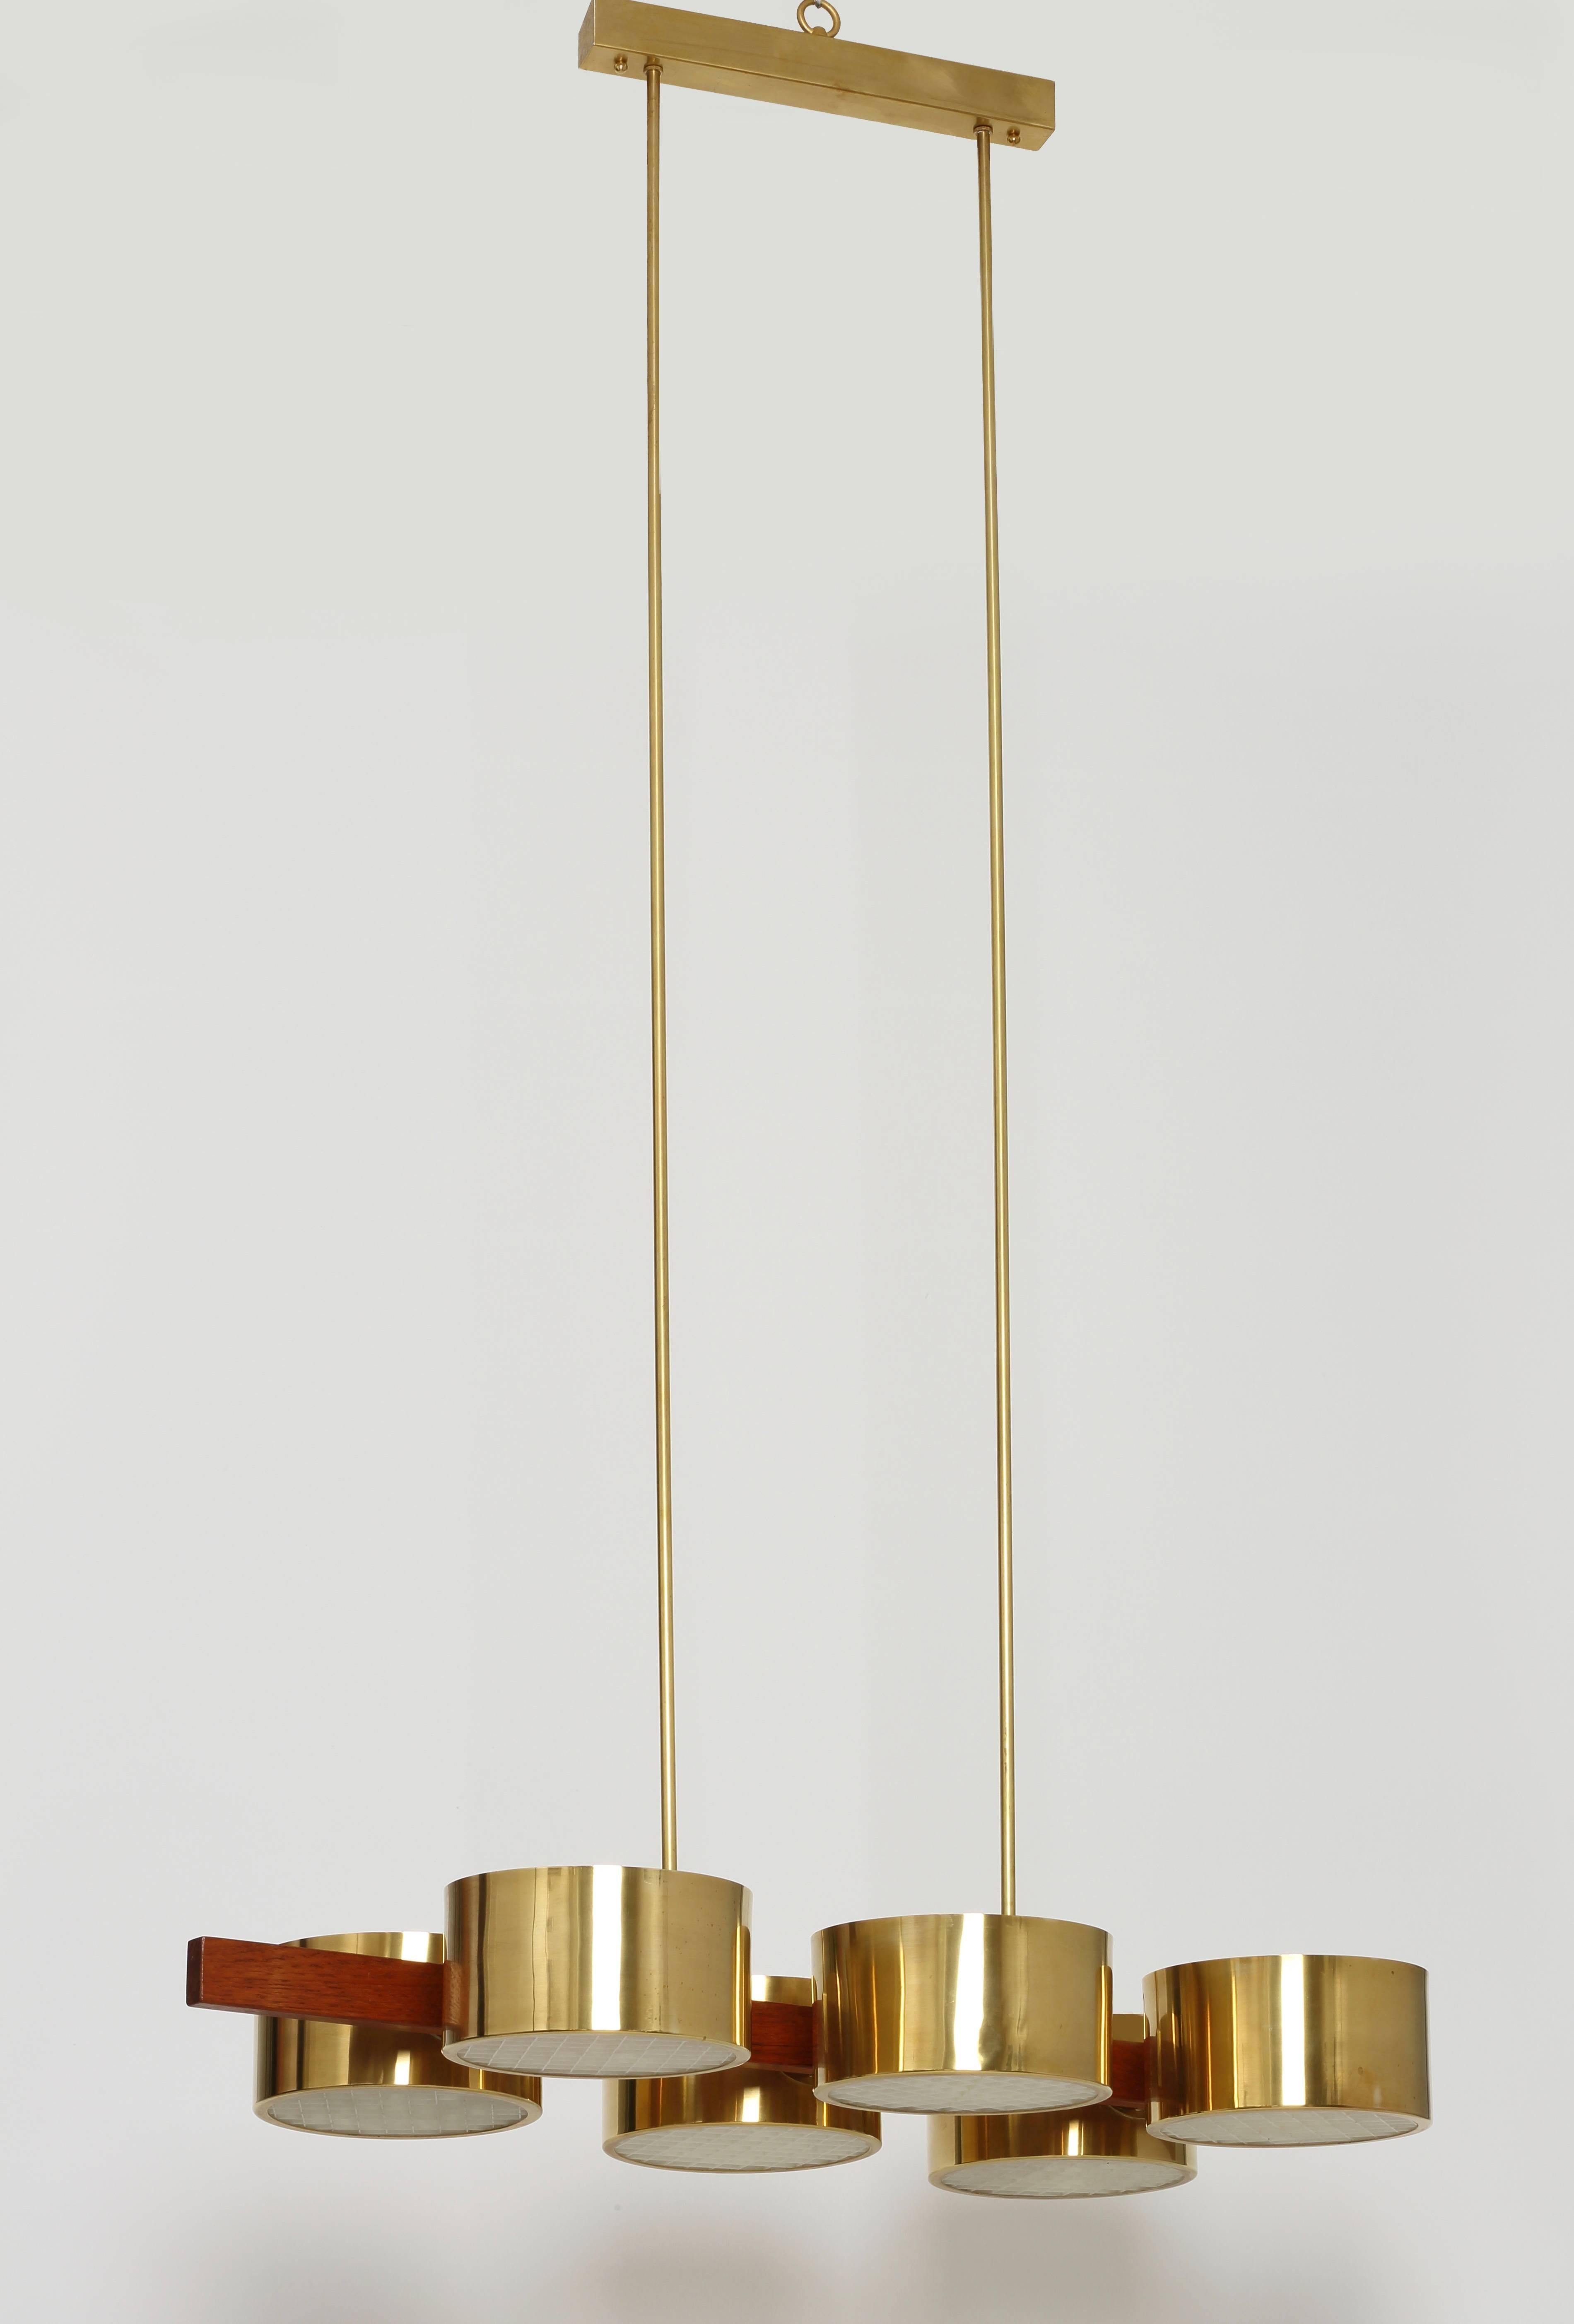 Hans Agne Jakobsson ceiling light. 
Made with brass and teak.
Acrylic diffusers. 2 fixtures available